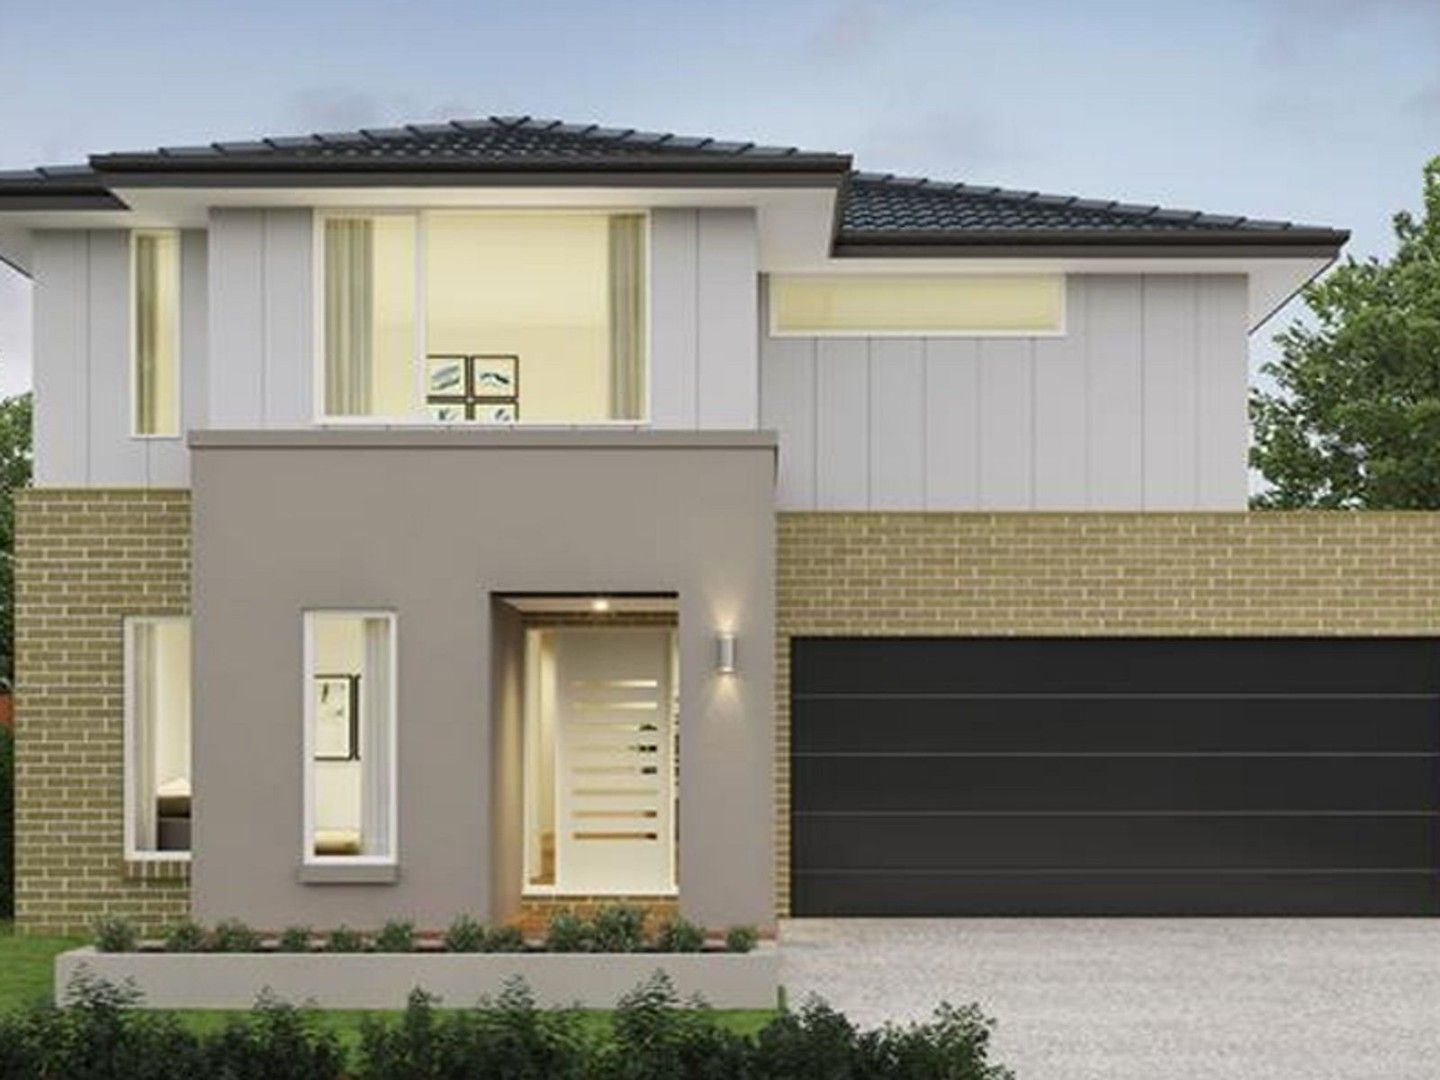 4 bedrooms New House & Land in 23325/2332 Hardys Road CLYDE NORTH VIC, 3978